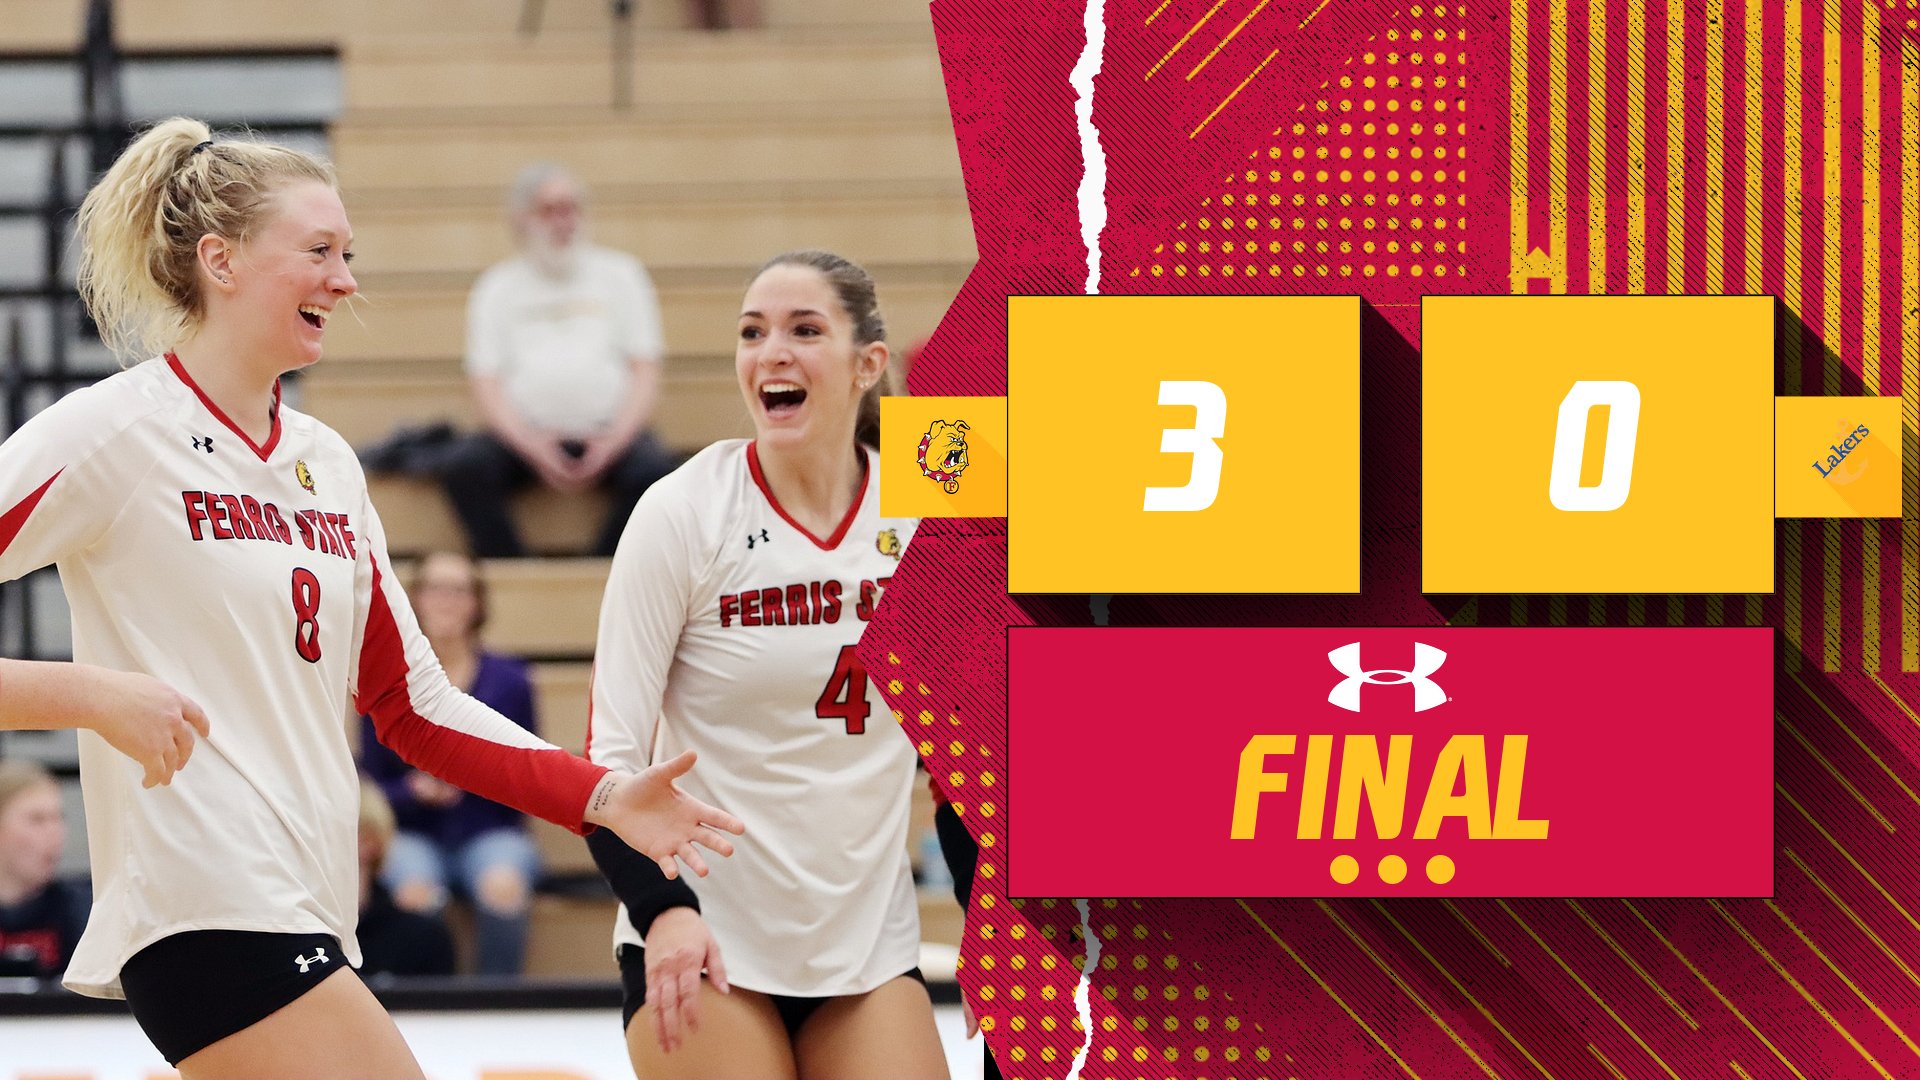 Ferris State Completes Upper Peninsula Sweep With Decisive Victory Over LSSU